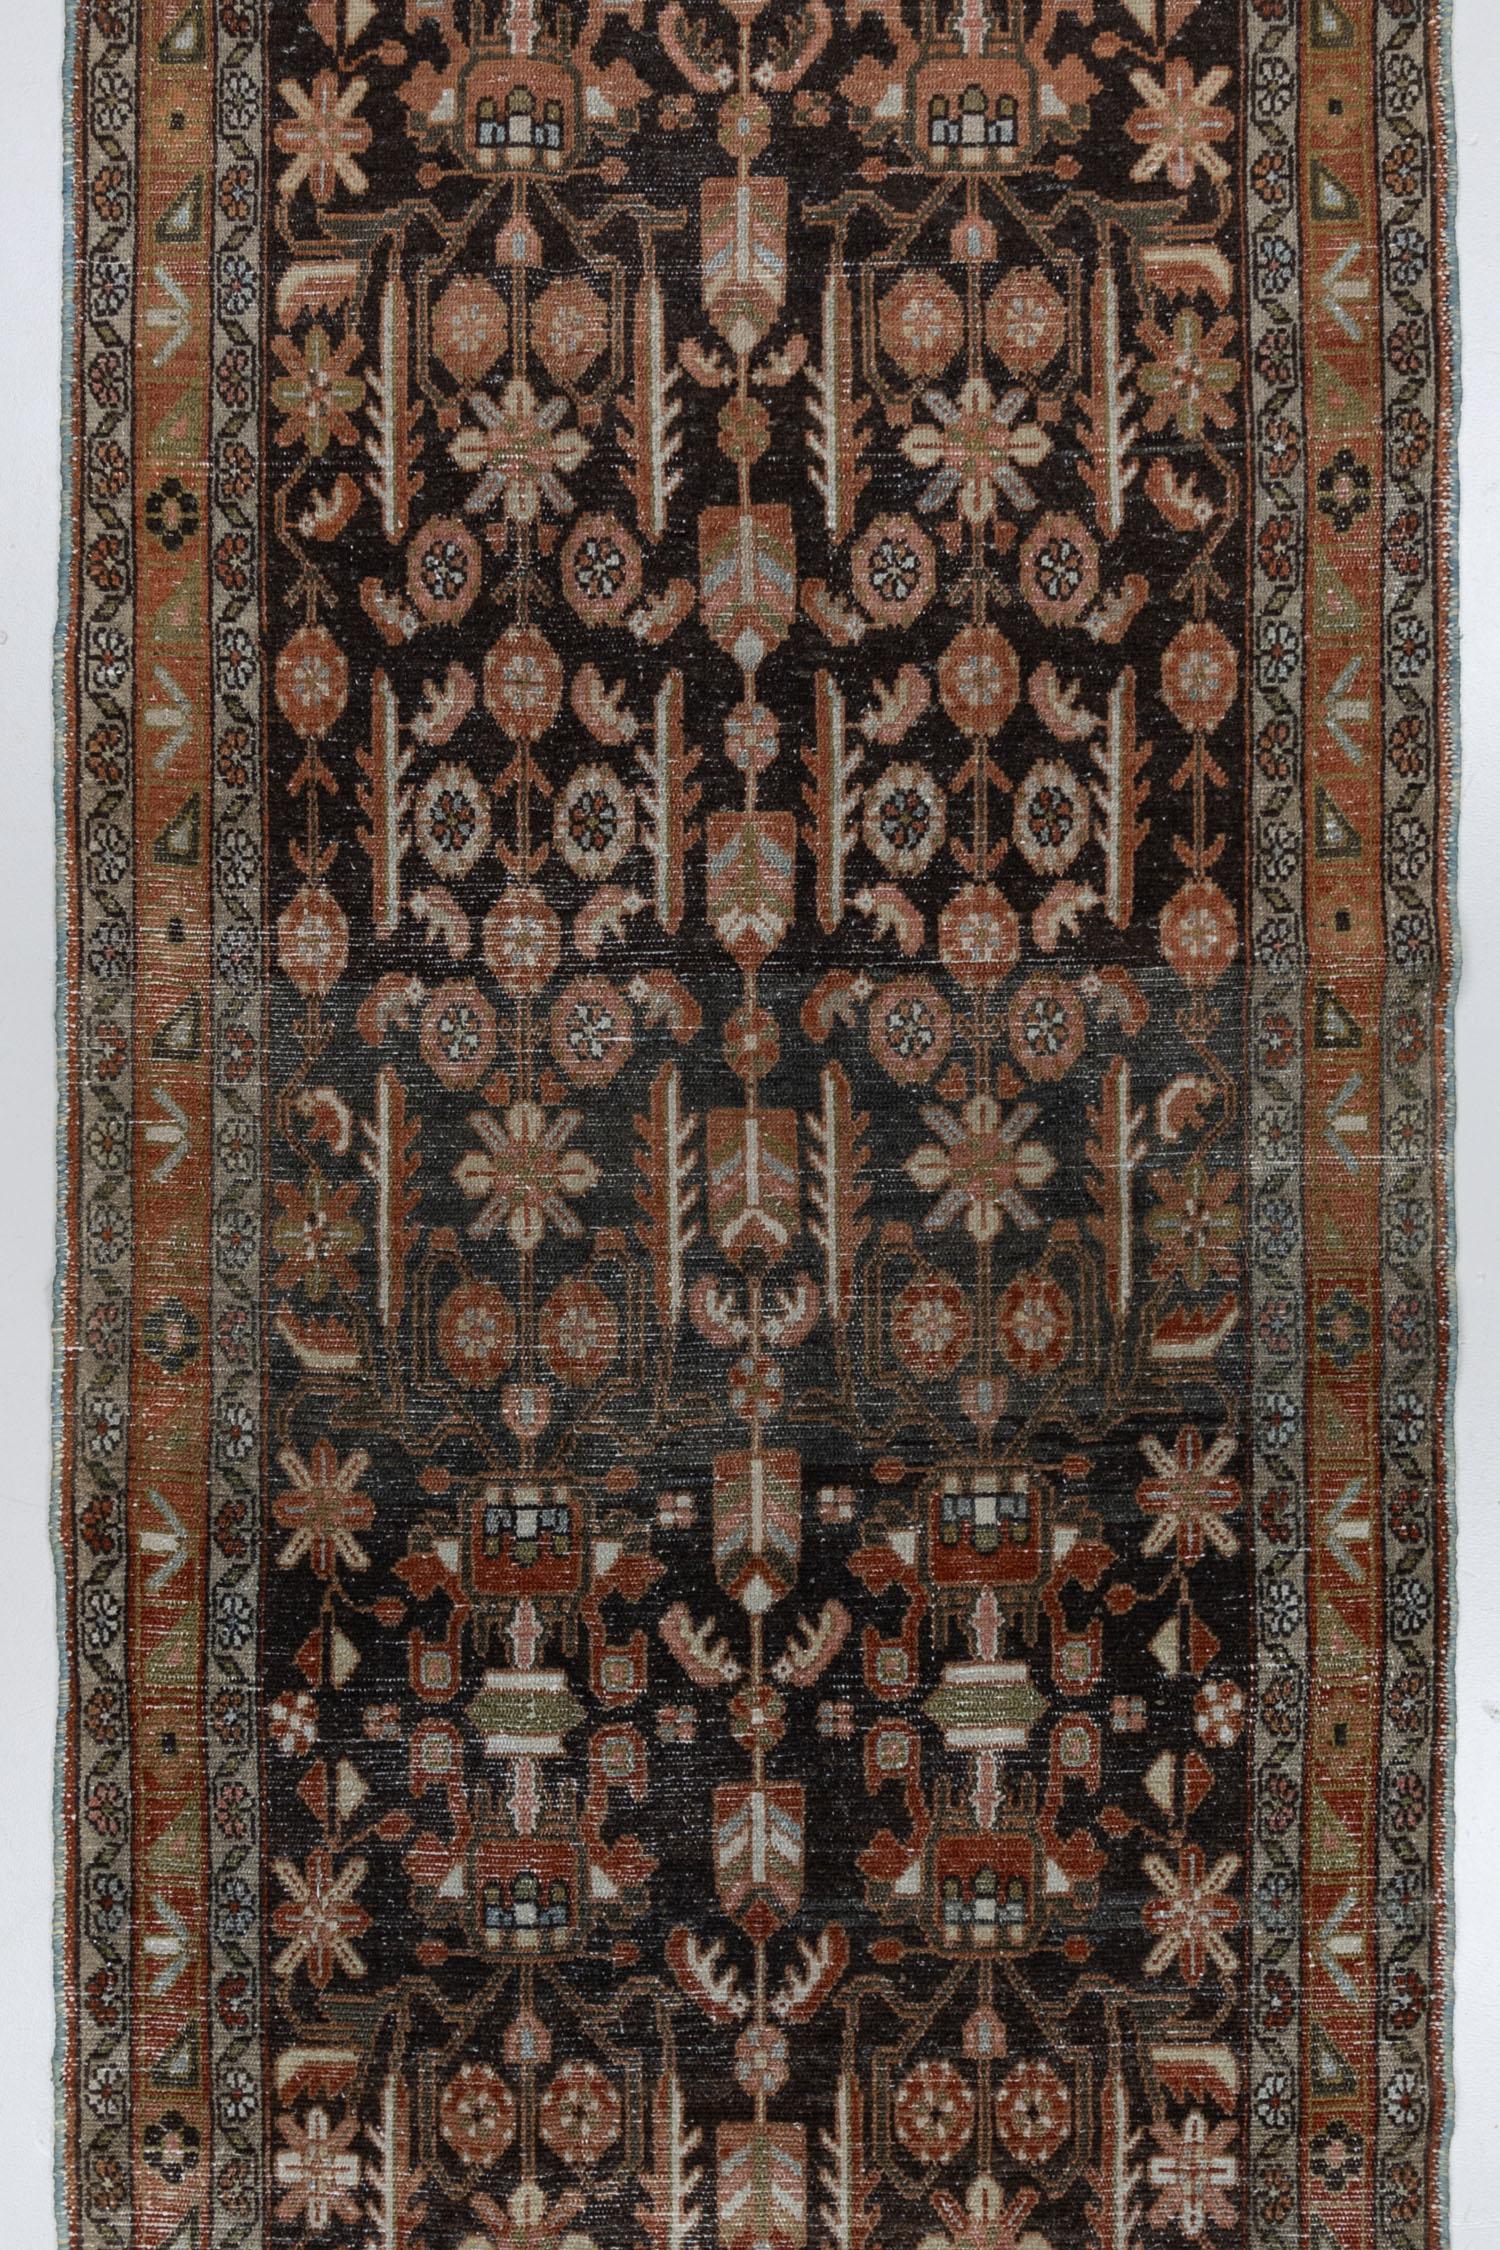 Exquisite 1920's Malayer runner with a deep field. Excellent vintage condition with a touch of wear that gives character and old world appeal. 

